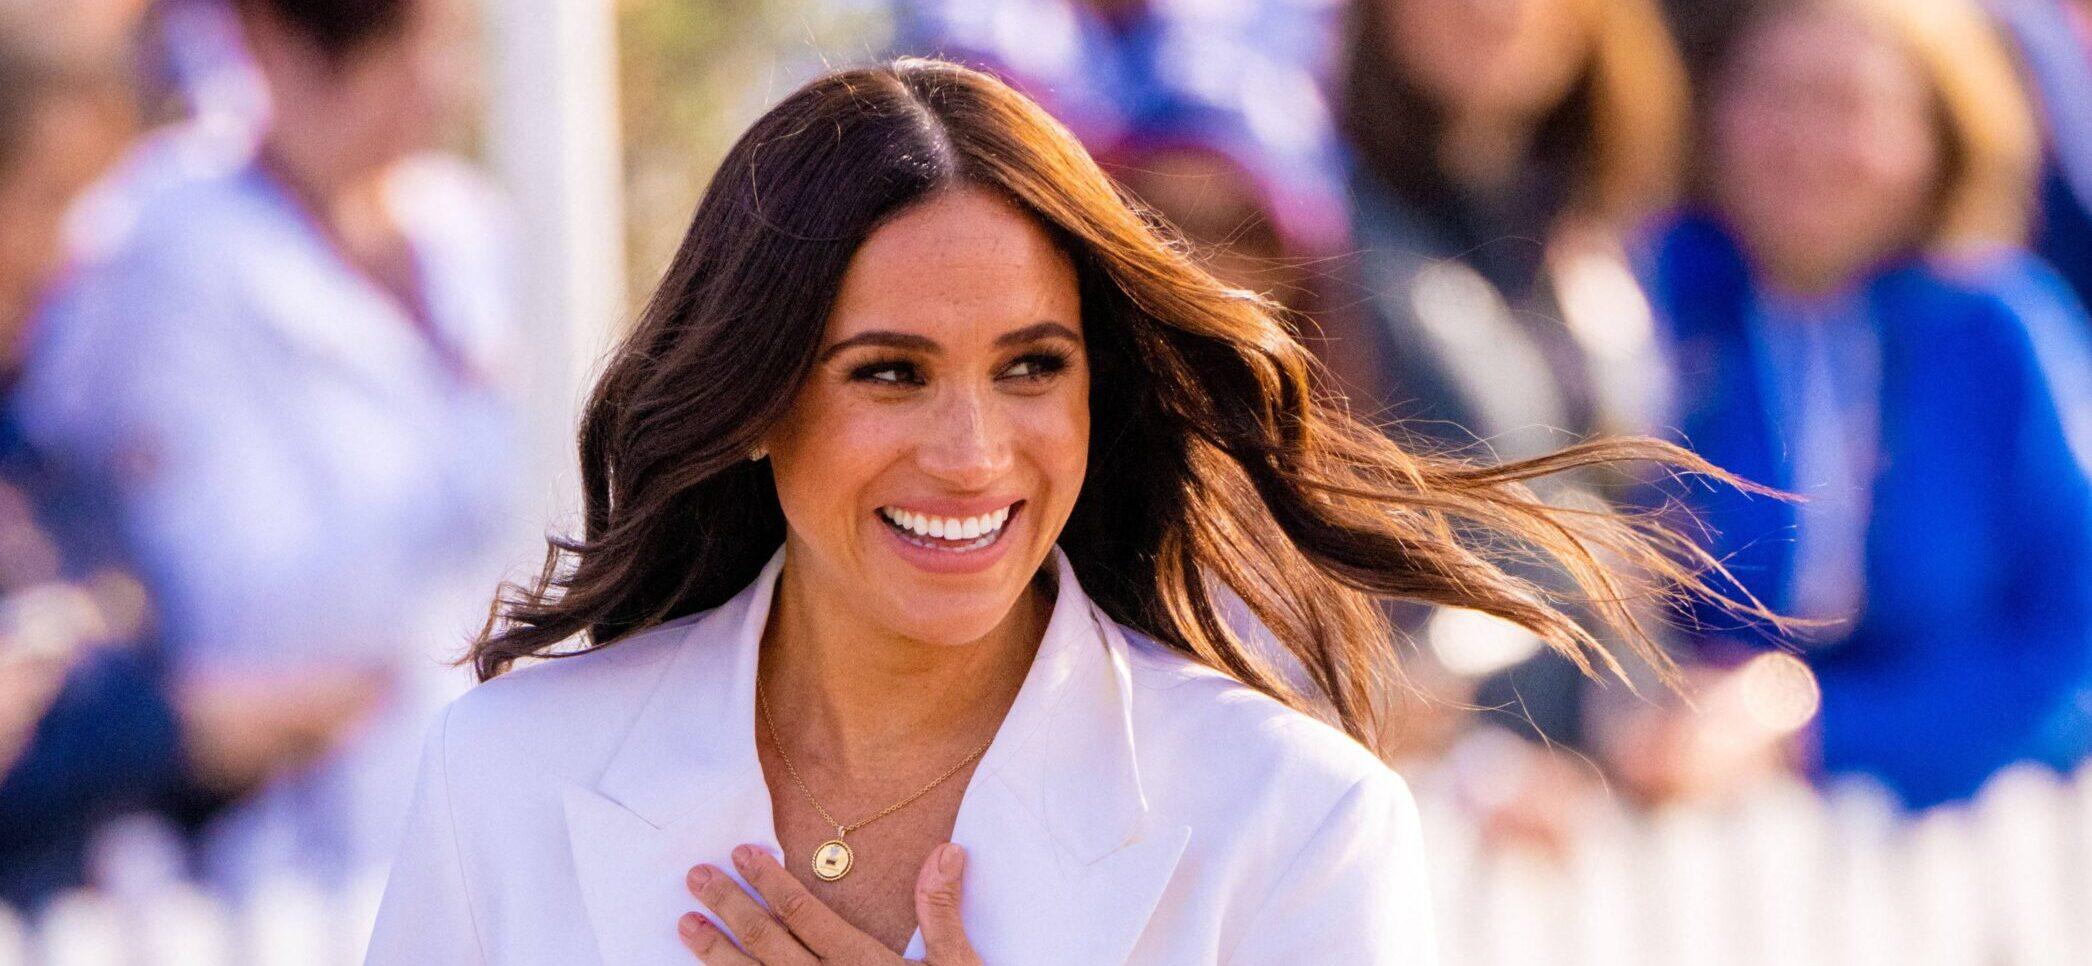 Meghan Markle's Unseen Photos Lead To Disabling Costar's Account